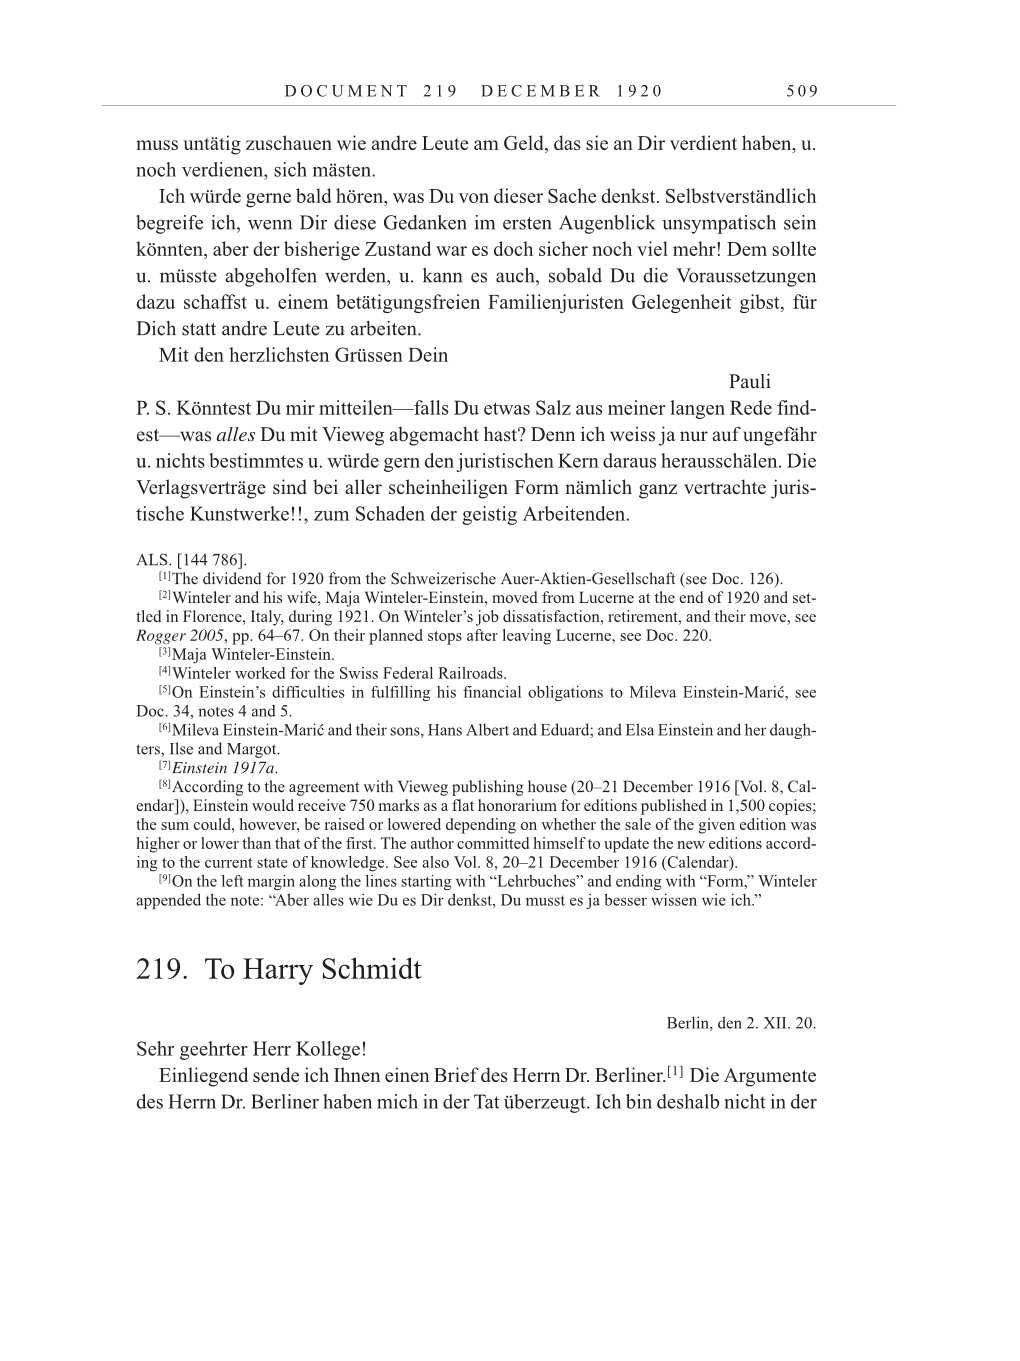 Volume 10: The Berlin Years: Correspondence May-December 1920 / Supplementary Correspondence 1909-1920 page 509